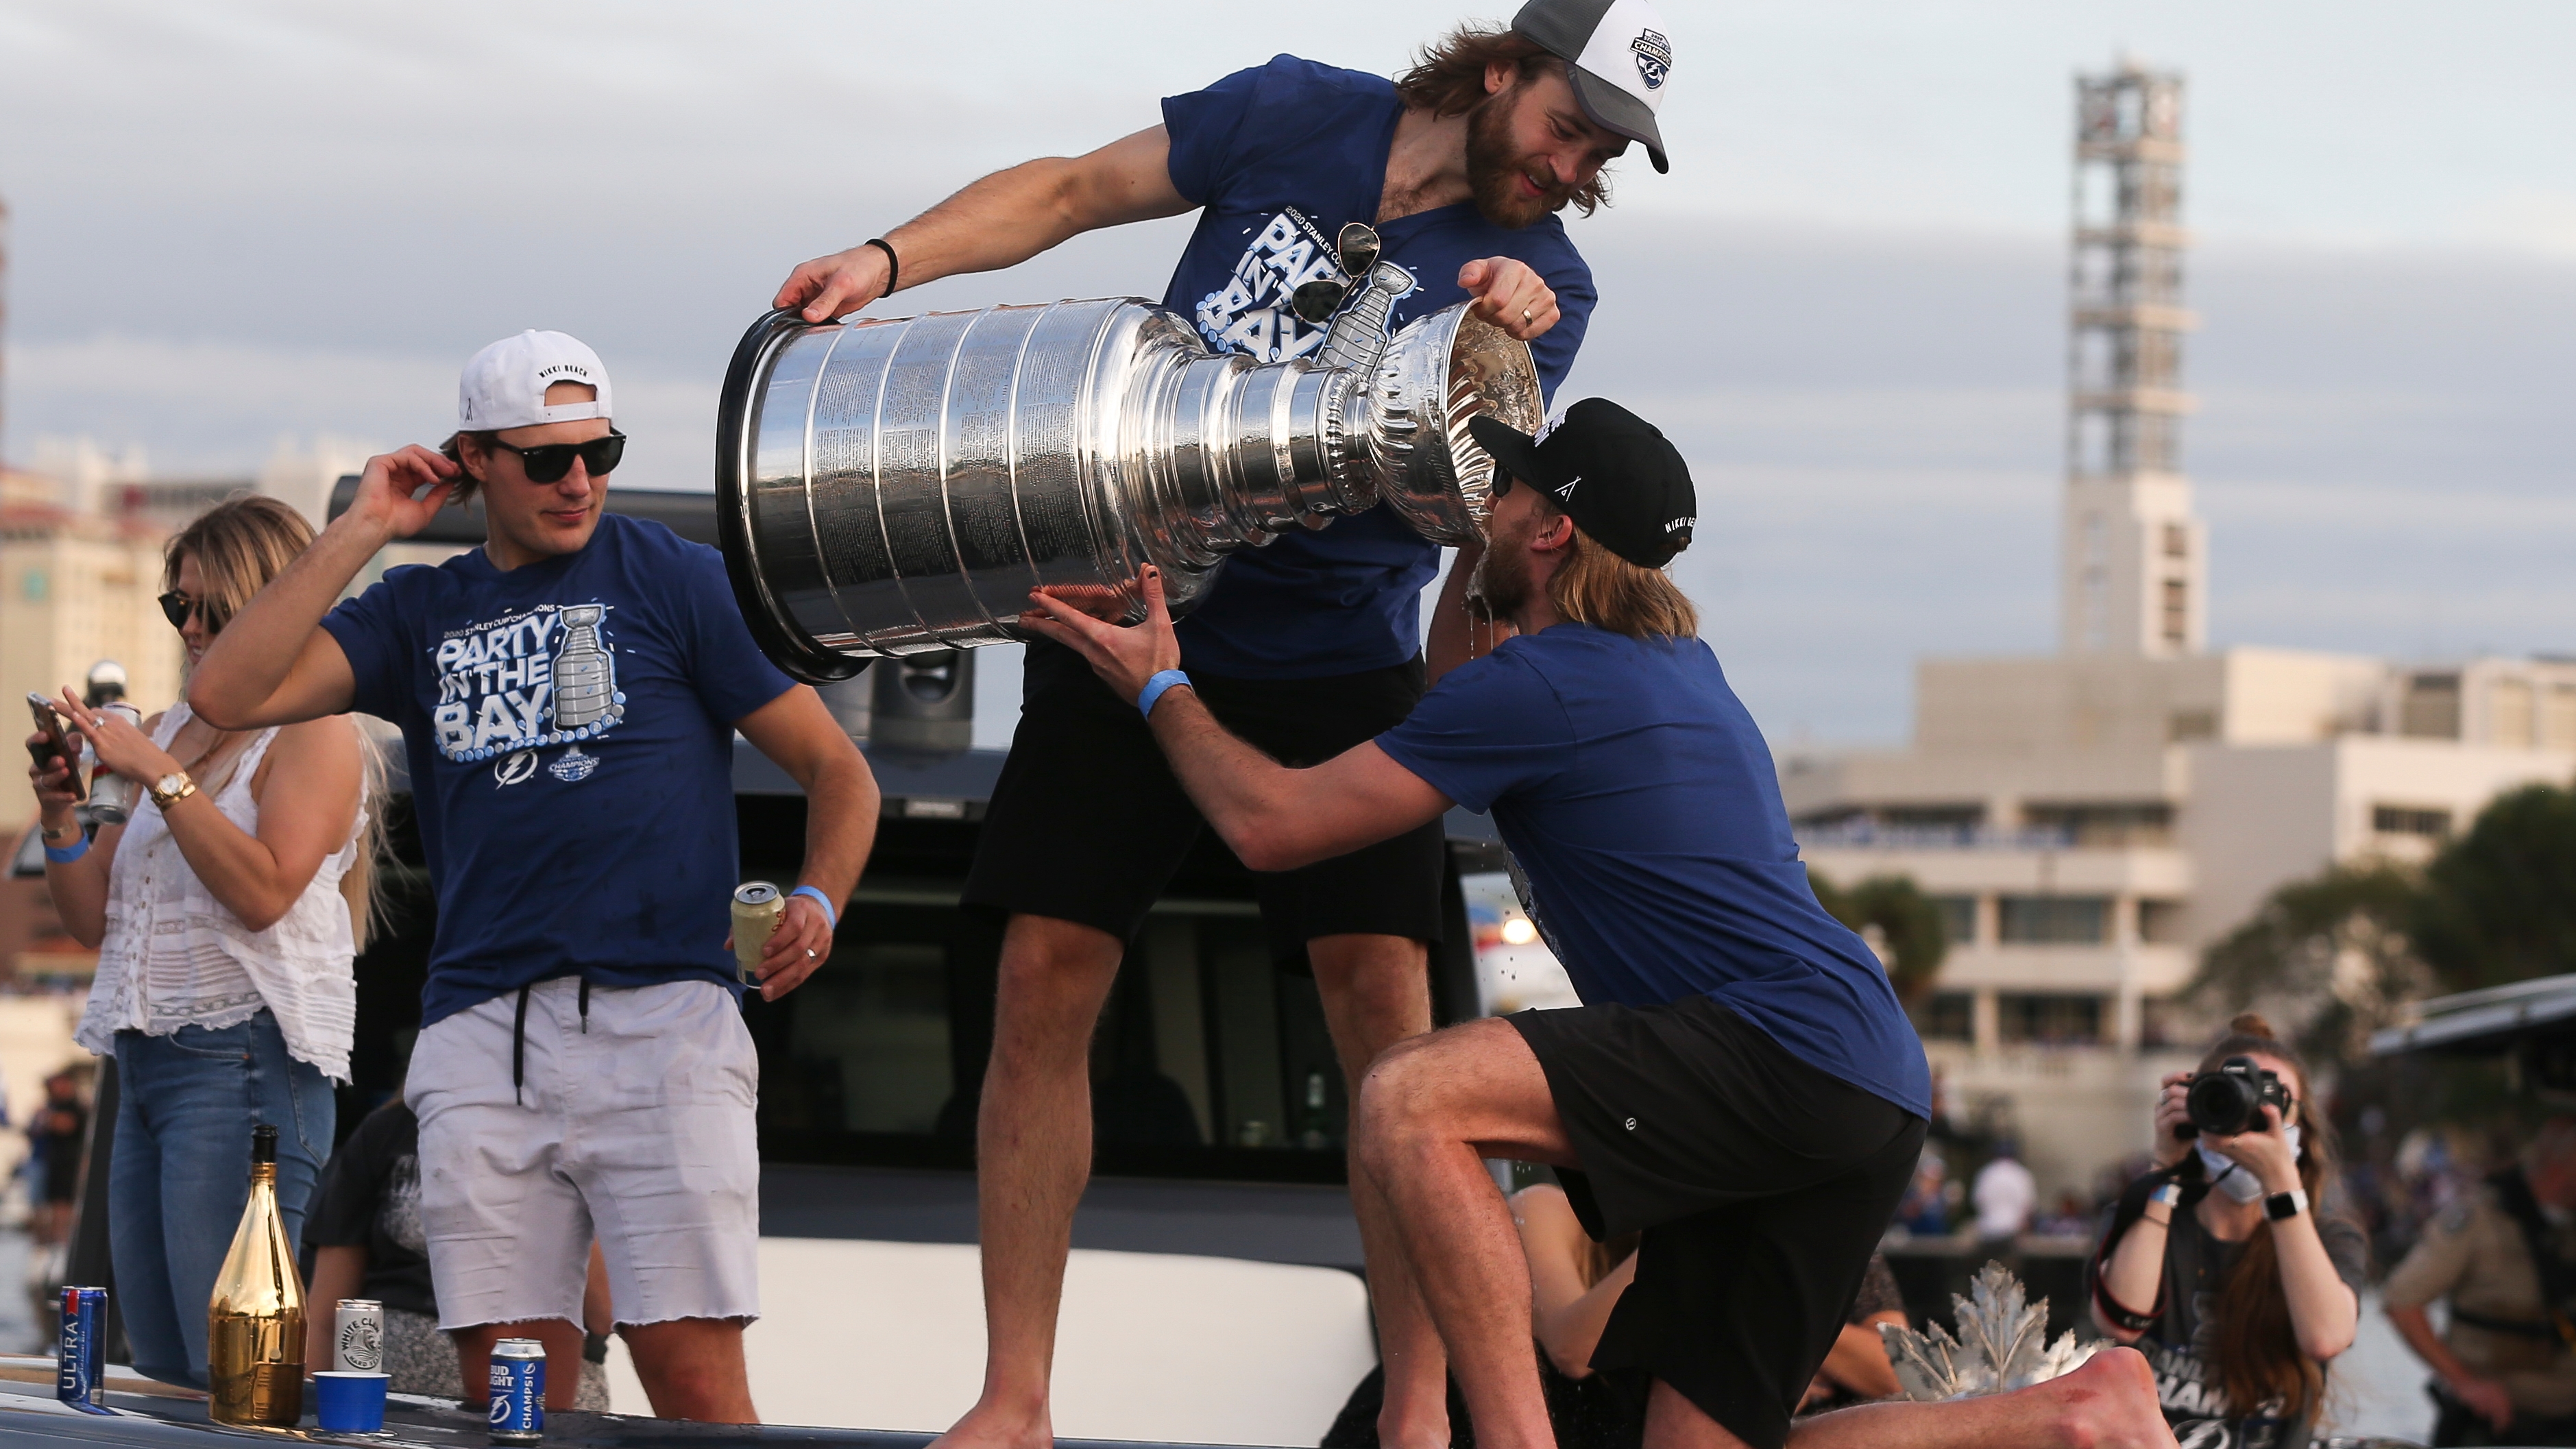 Tampa Bay Lightning Fans Bid Team Farewell By Forming Giant